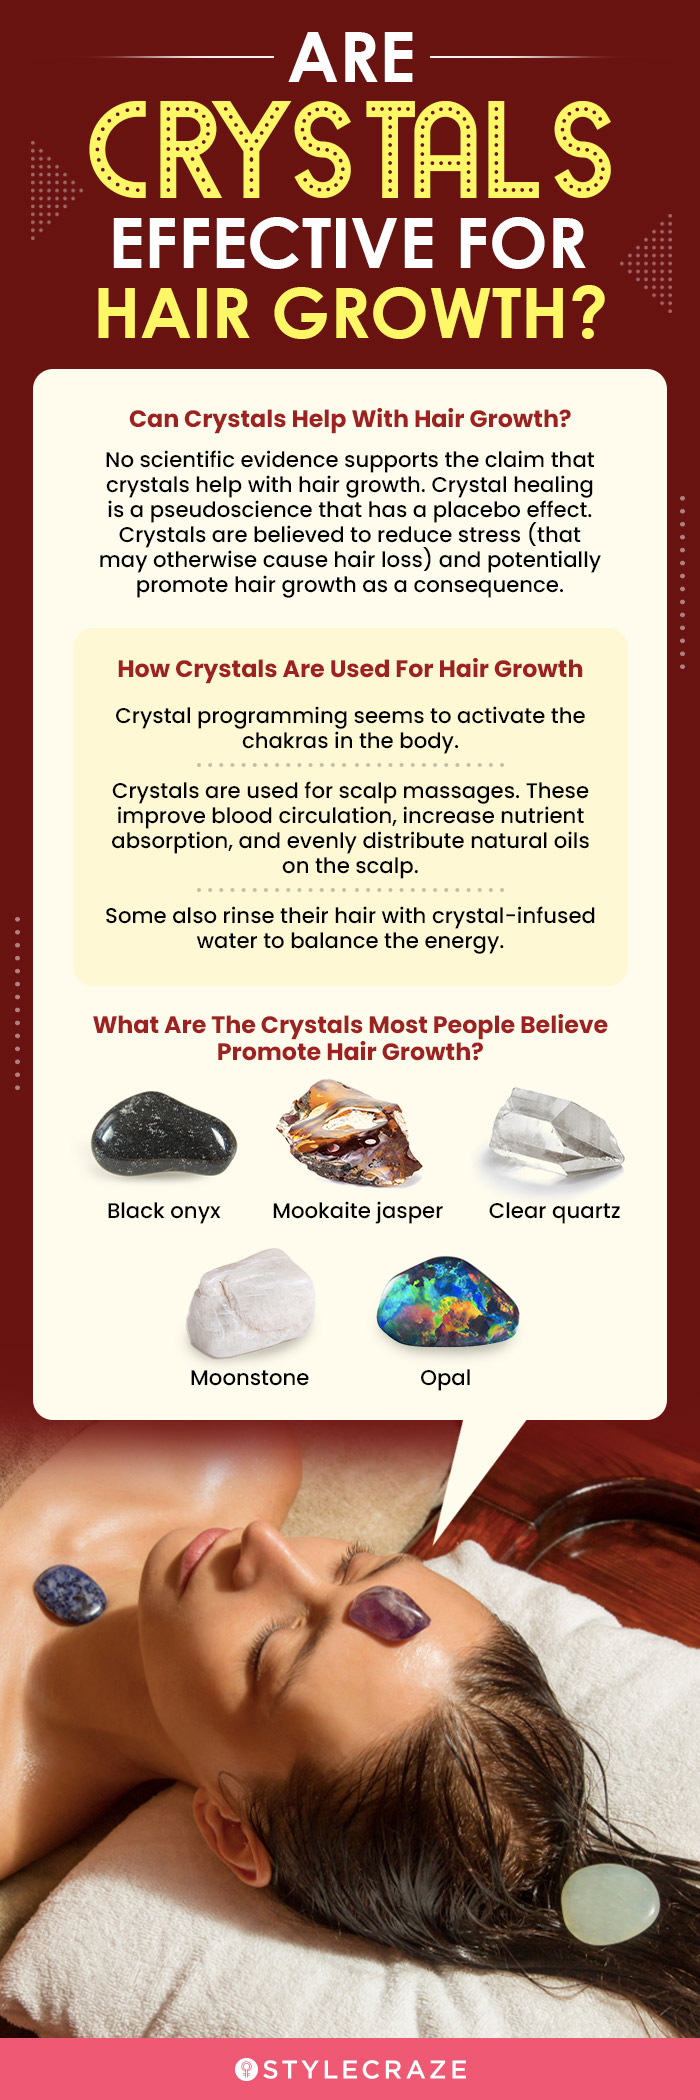 are crystals effective for hair growth (infographic)